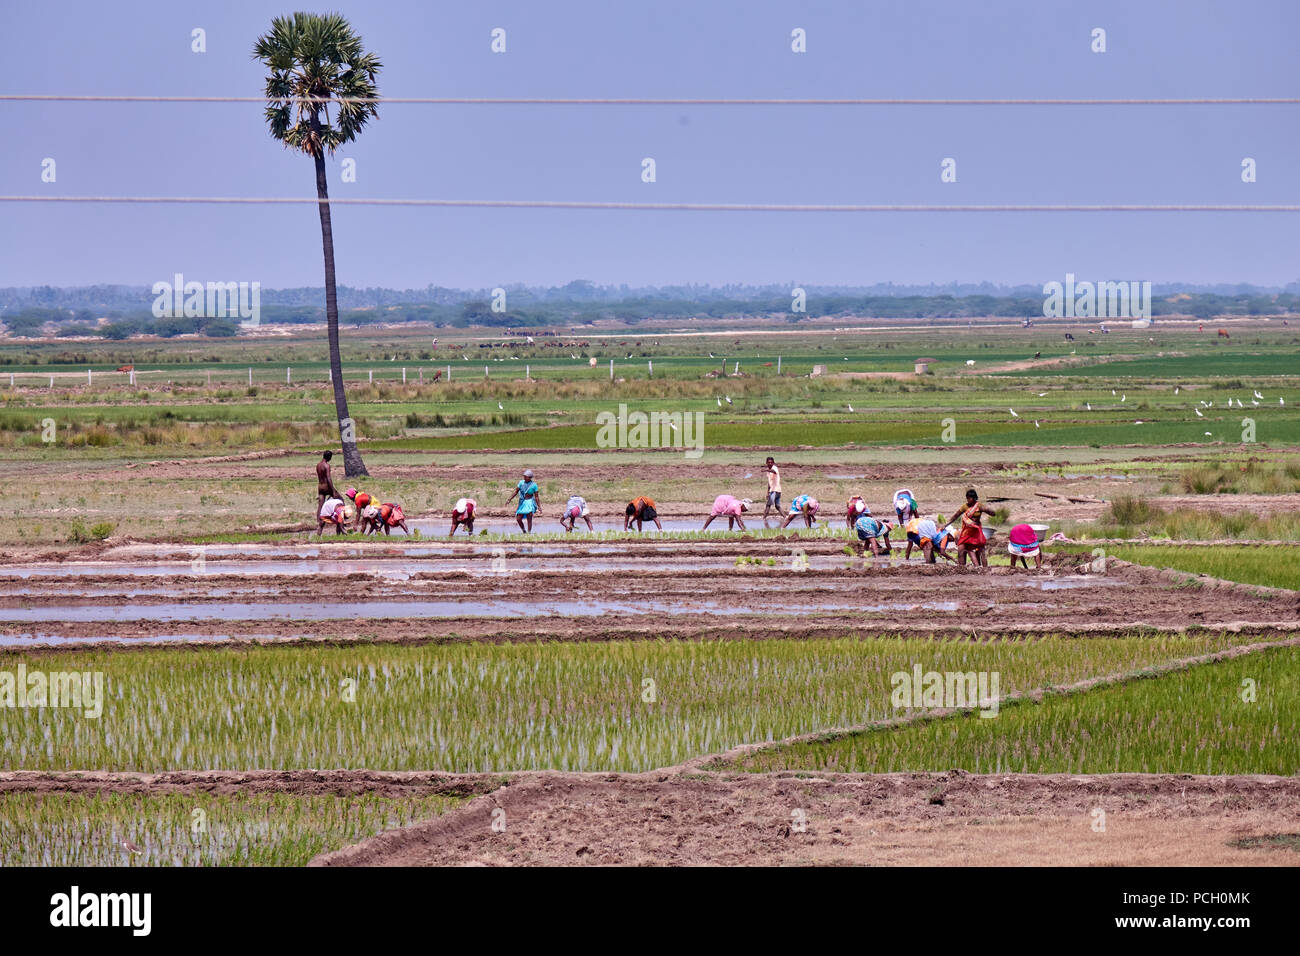 Rice planters working in the paddy fields of India Stock Photo